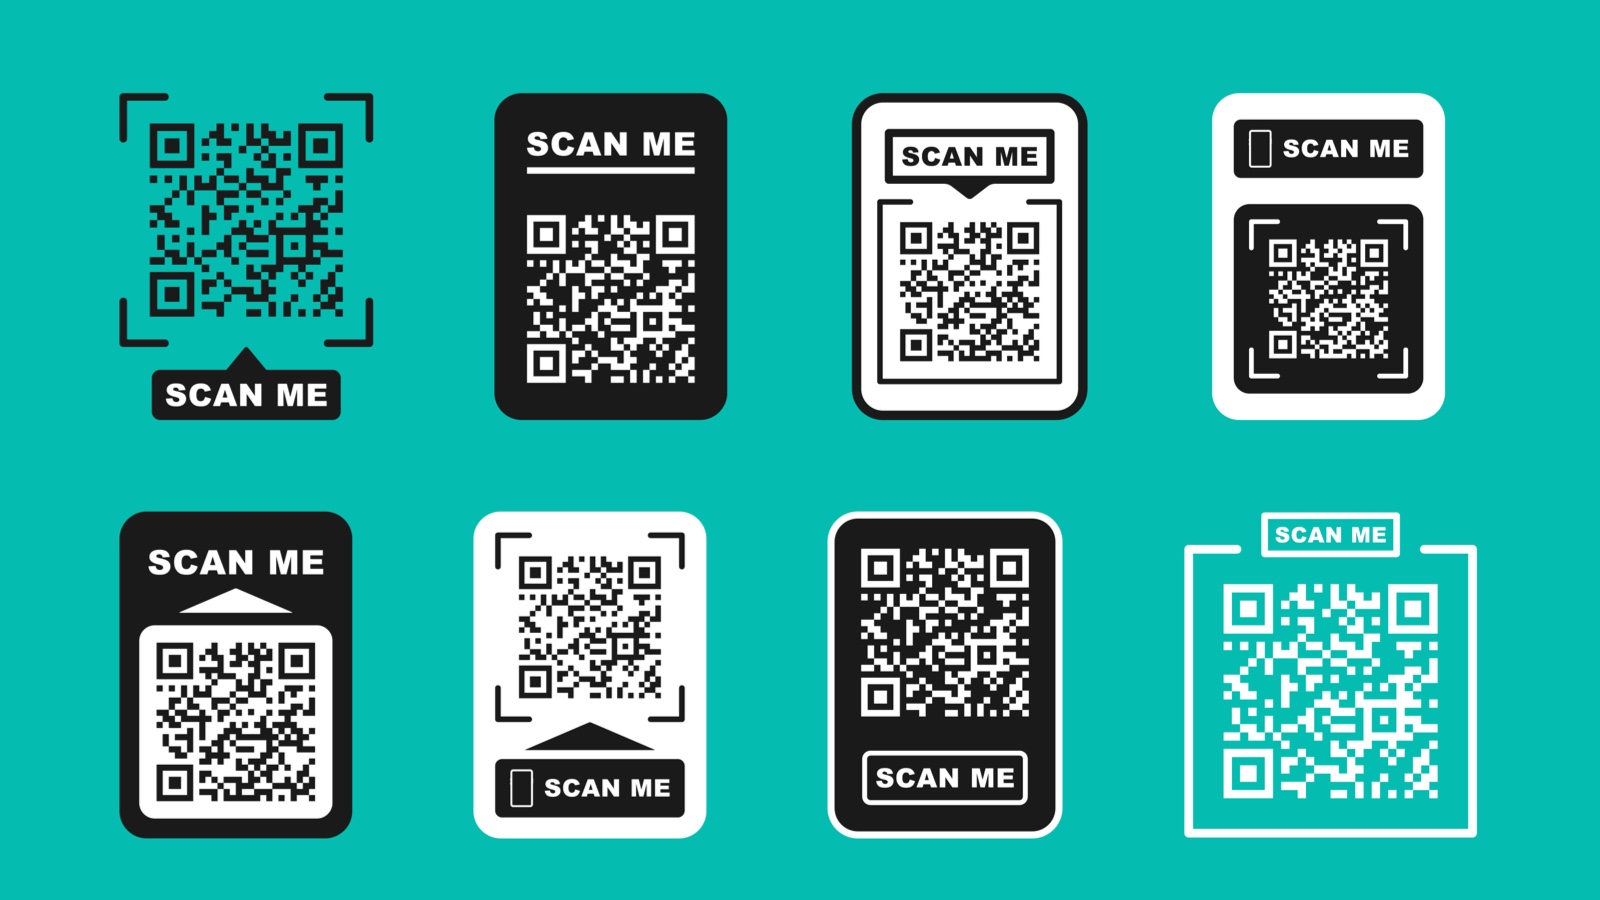 Learning with QR Codes – LCC Teaching Hub